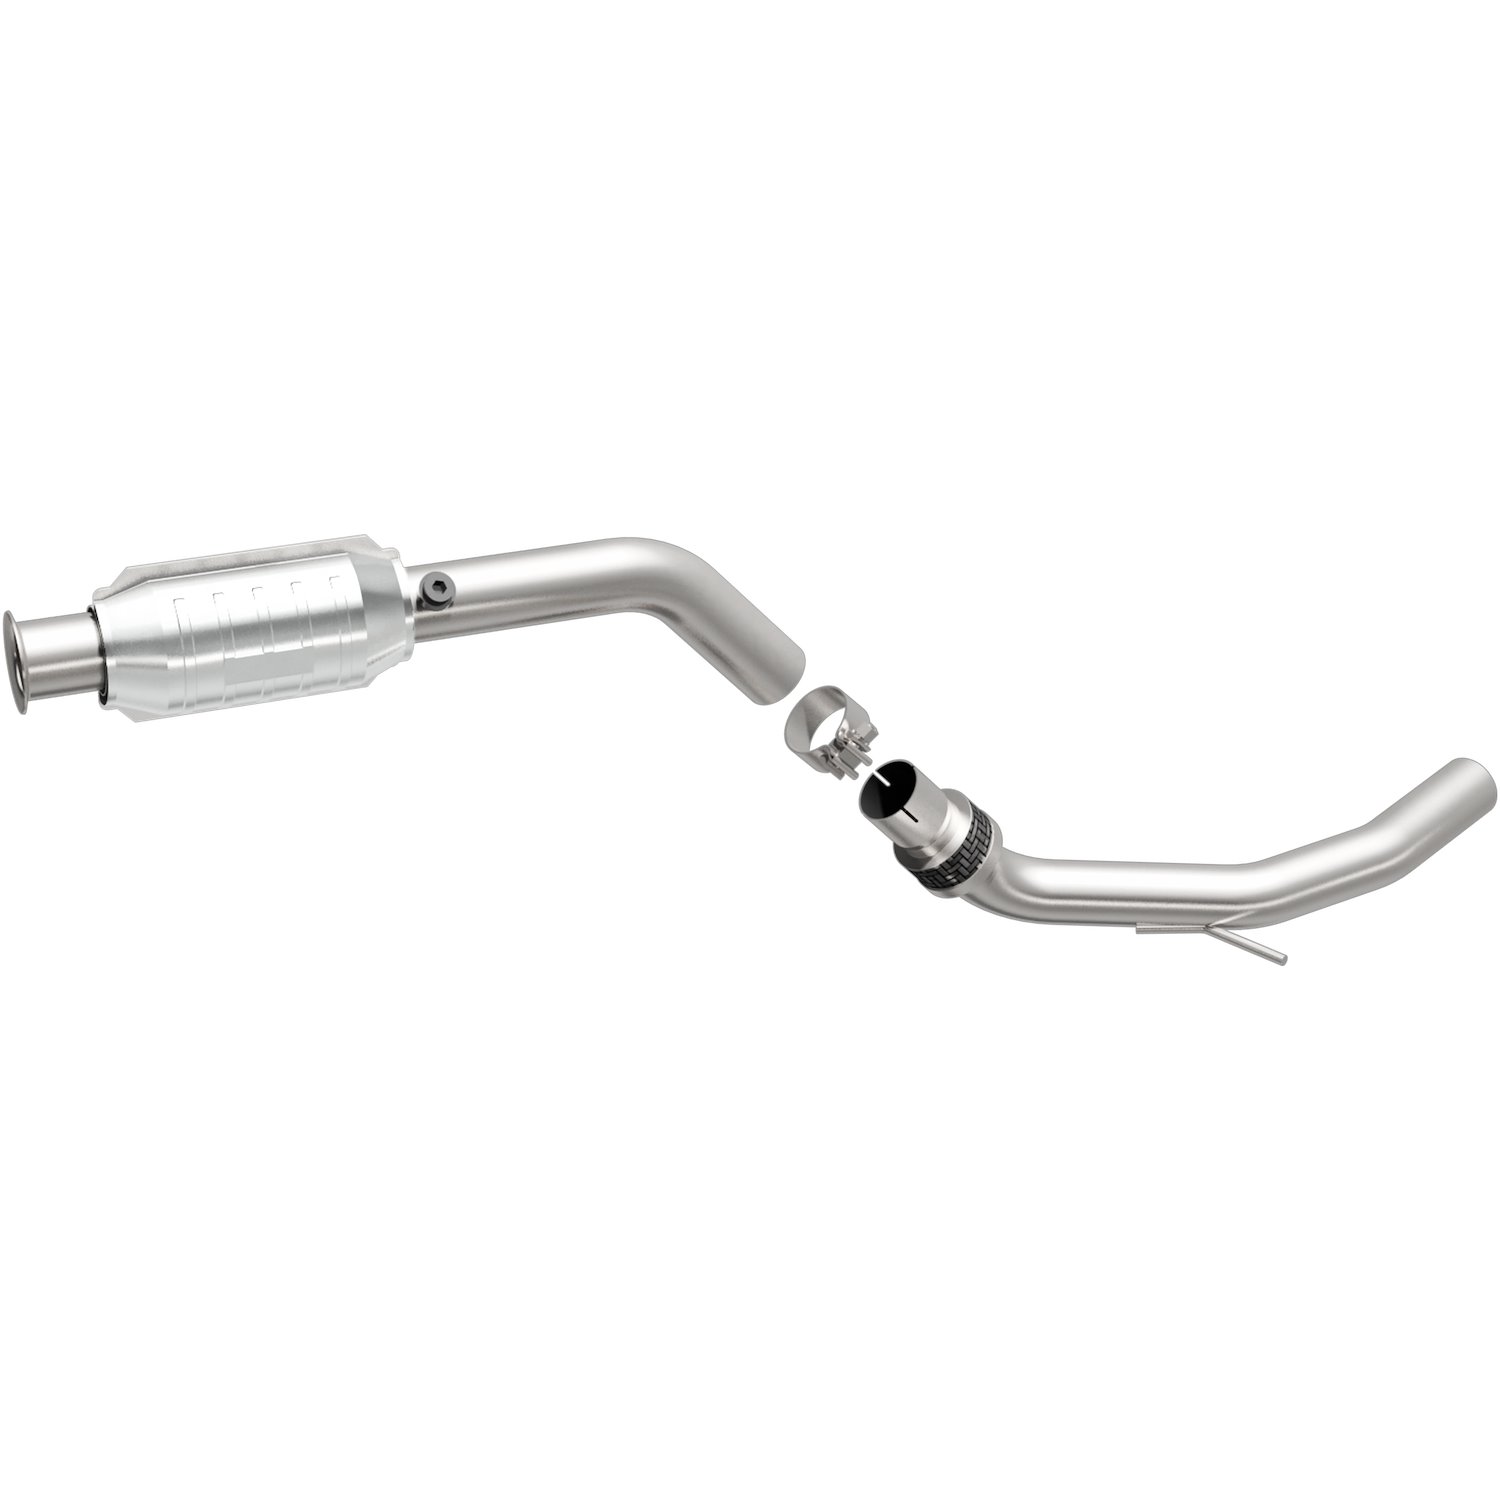 OEM Grade Federal / EPA Compliant Direct-Fit Catalytic Converter 49031